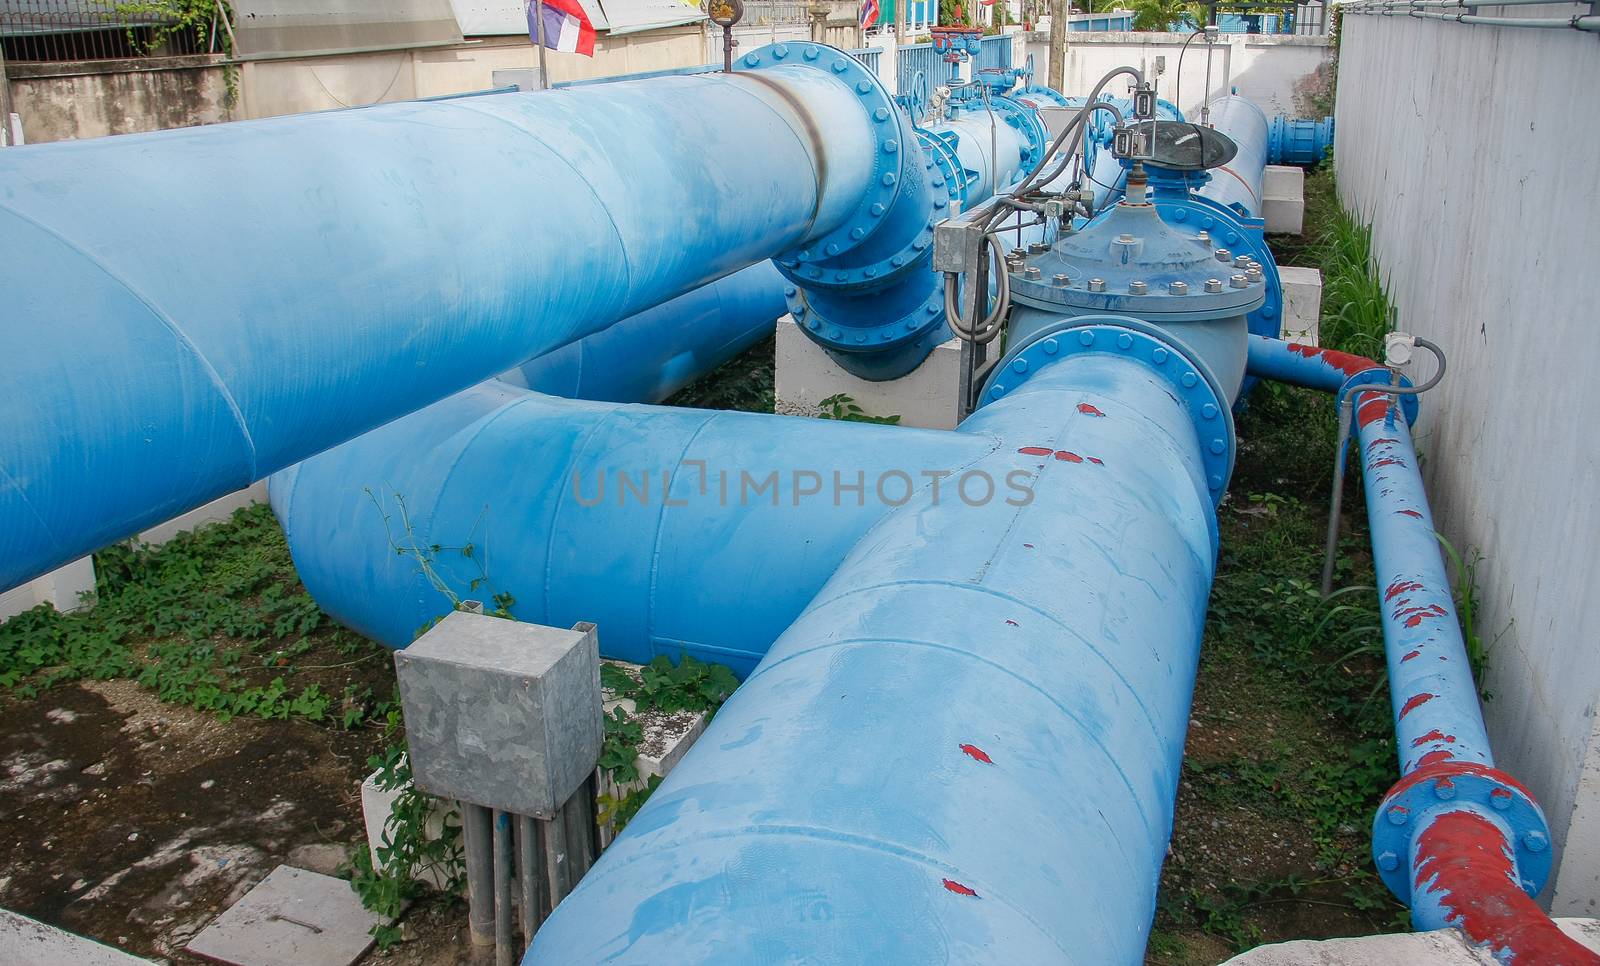 flanges, couplings, valves and pipes of an irrigation water